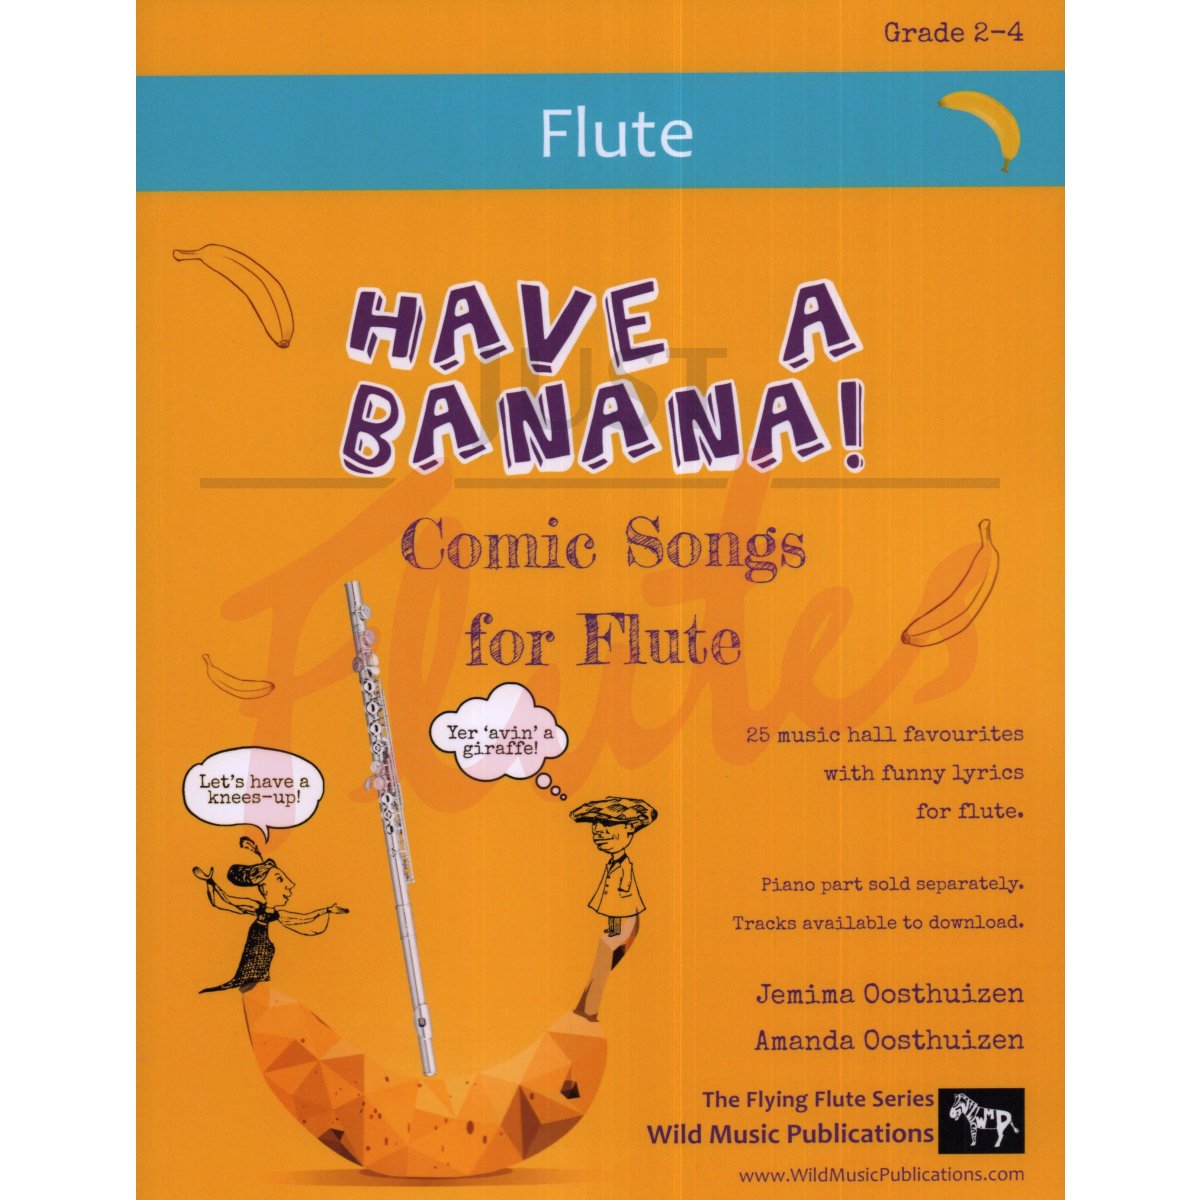 Have a Banana! Comic Songs for Flute